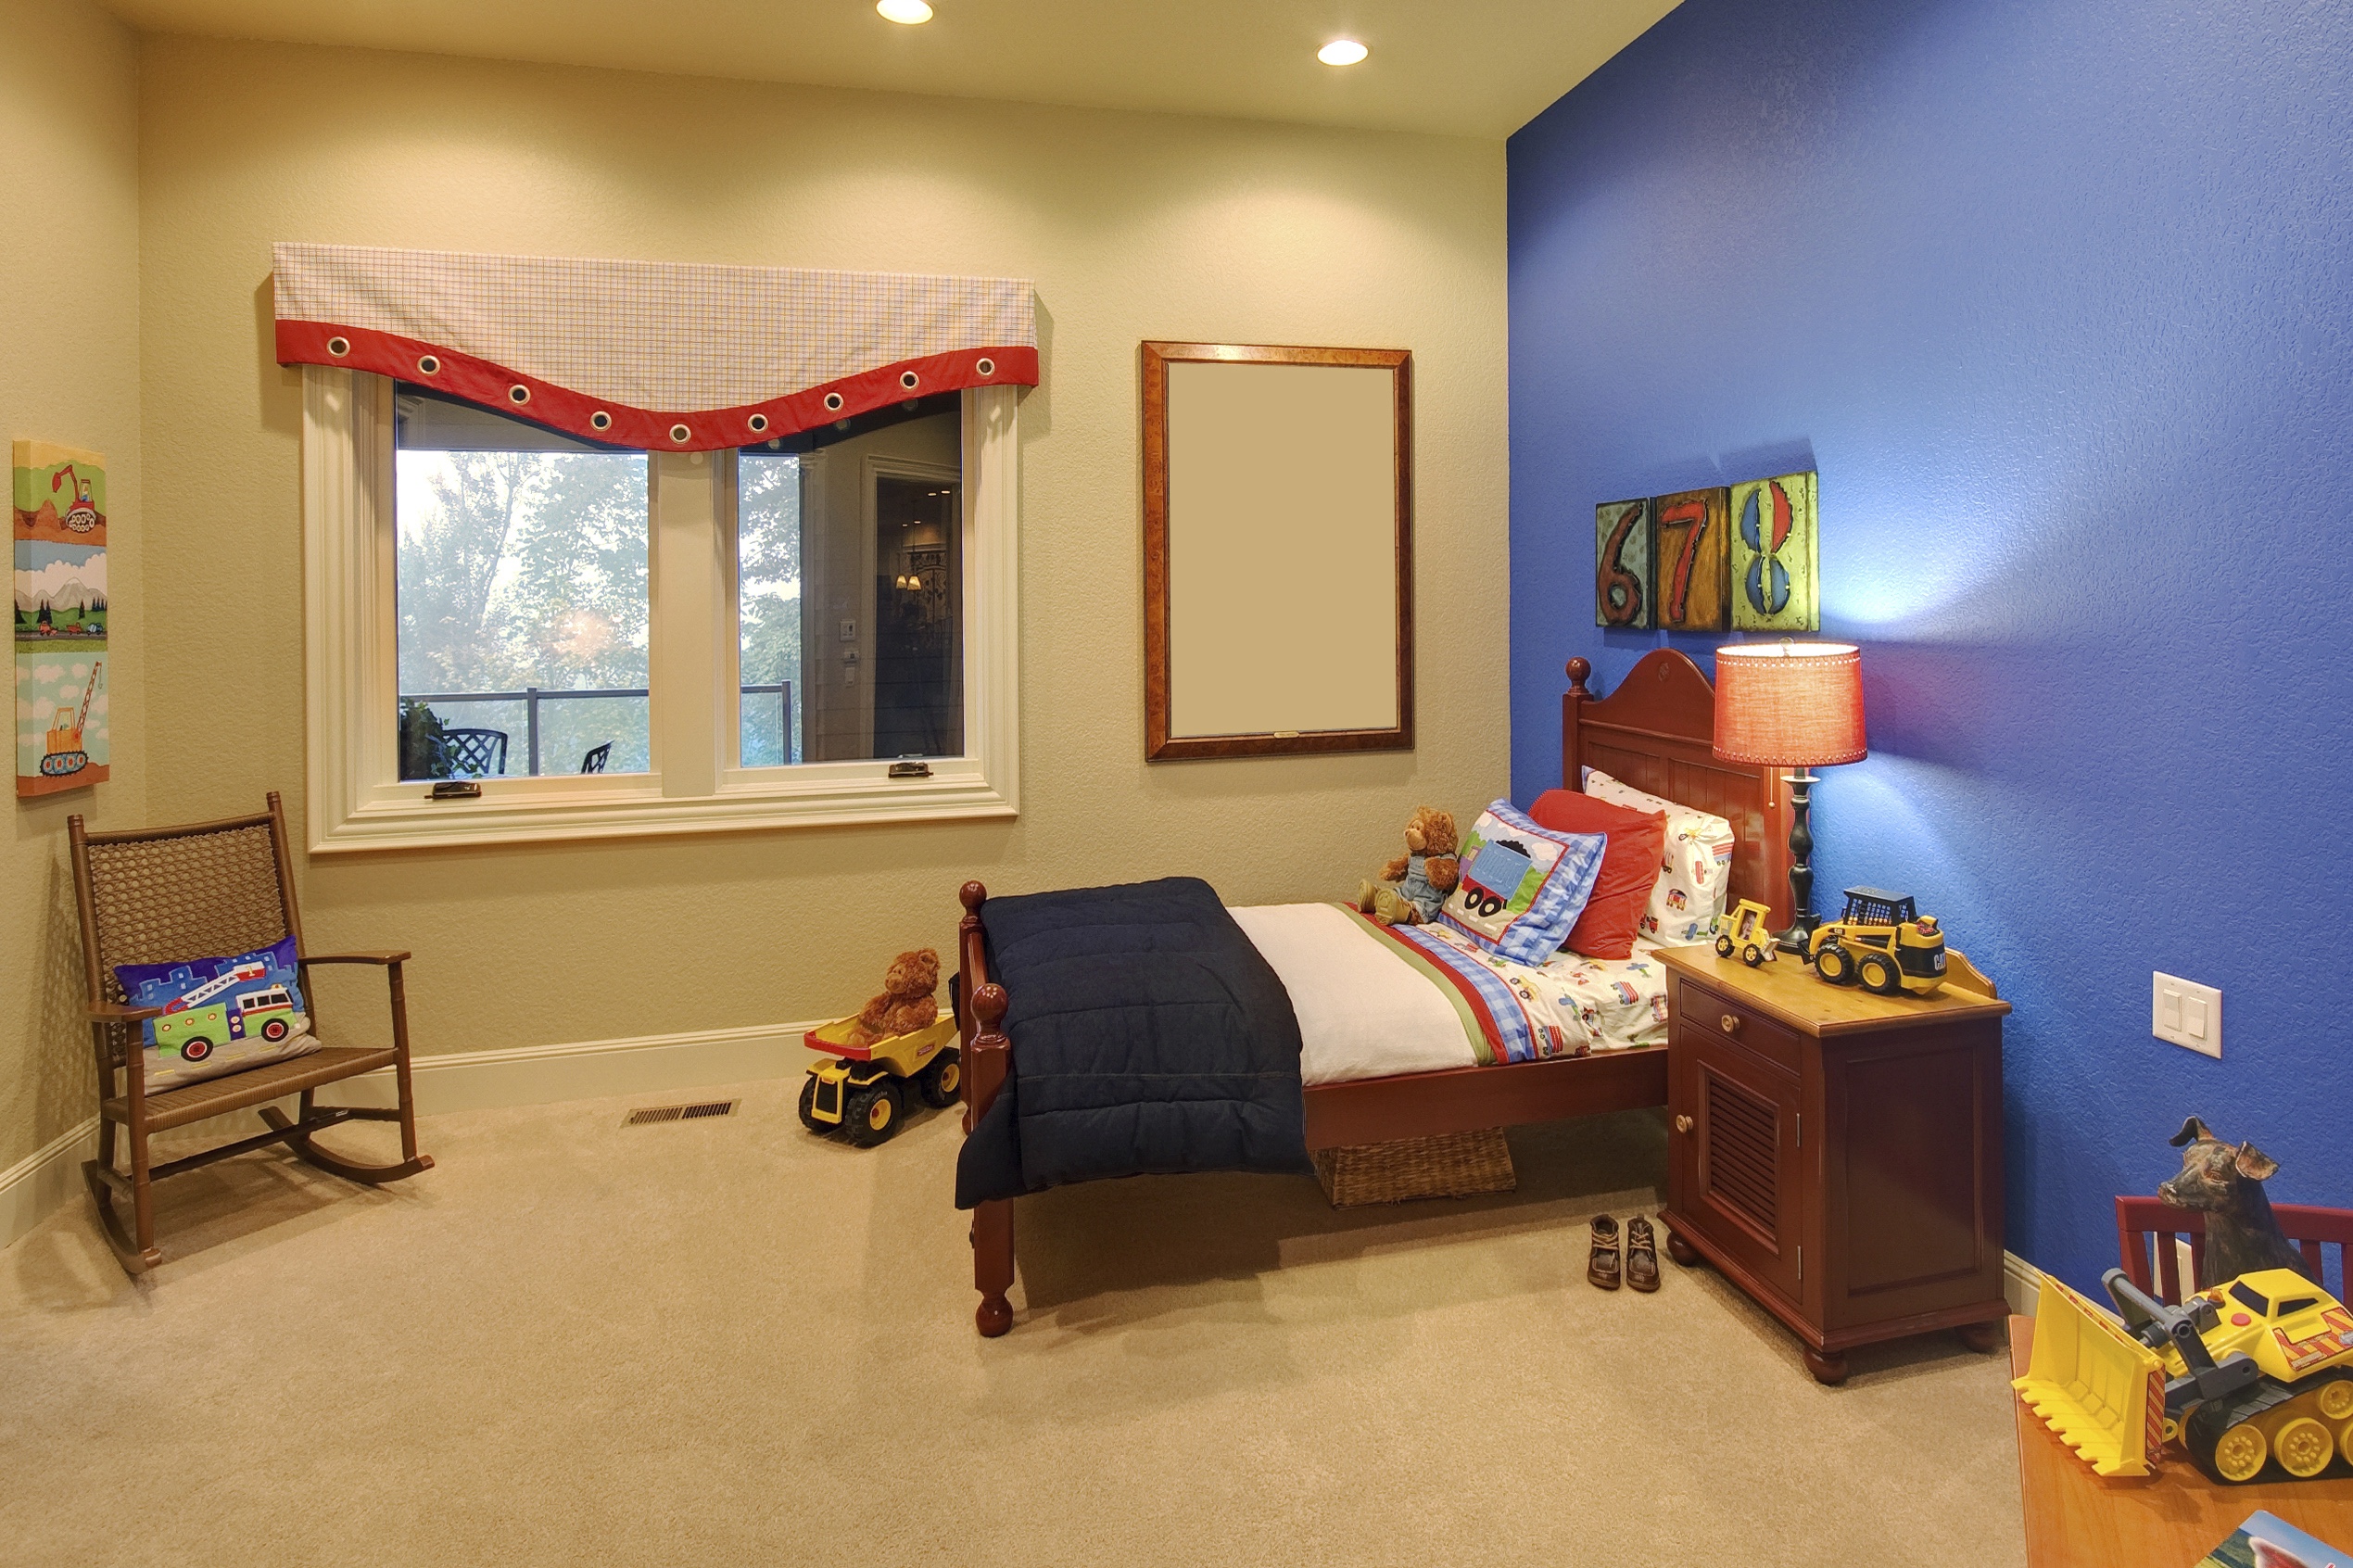 5 Easy Ways to Maximize the Space in Kids' Rooms - Daily ...